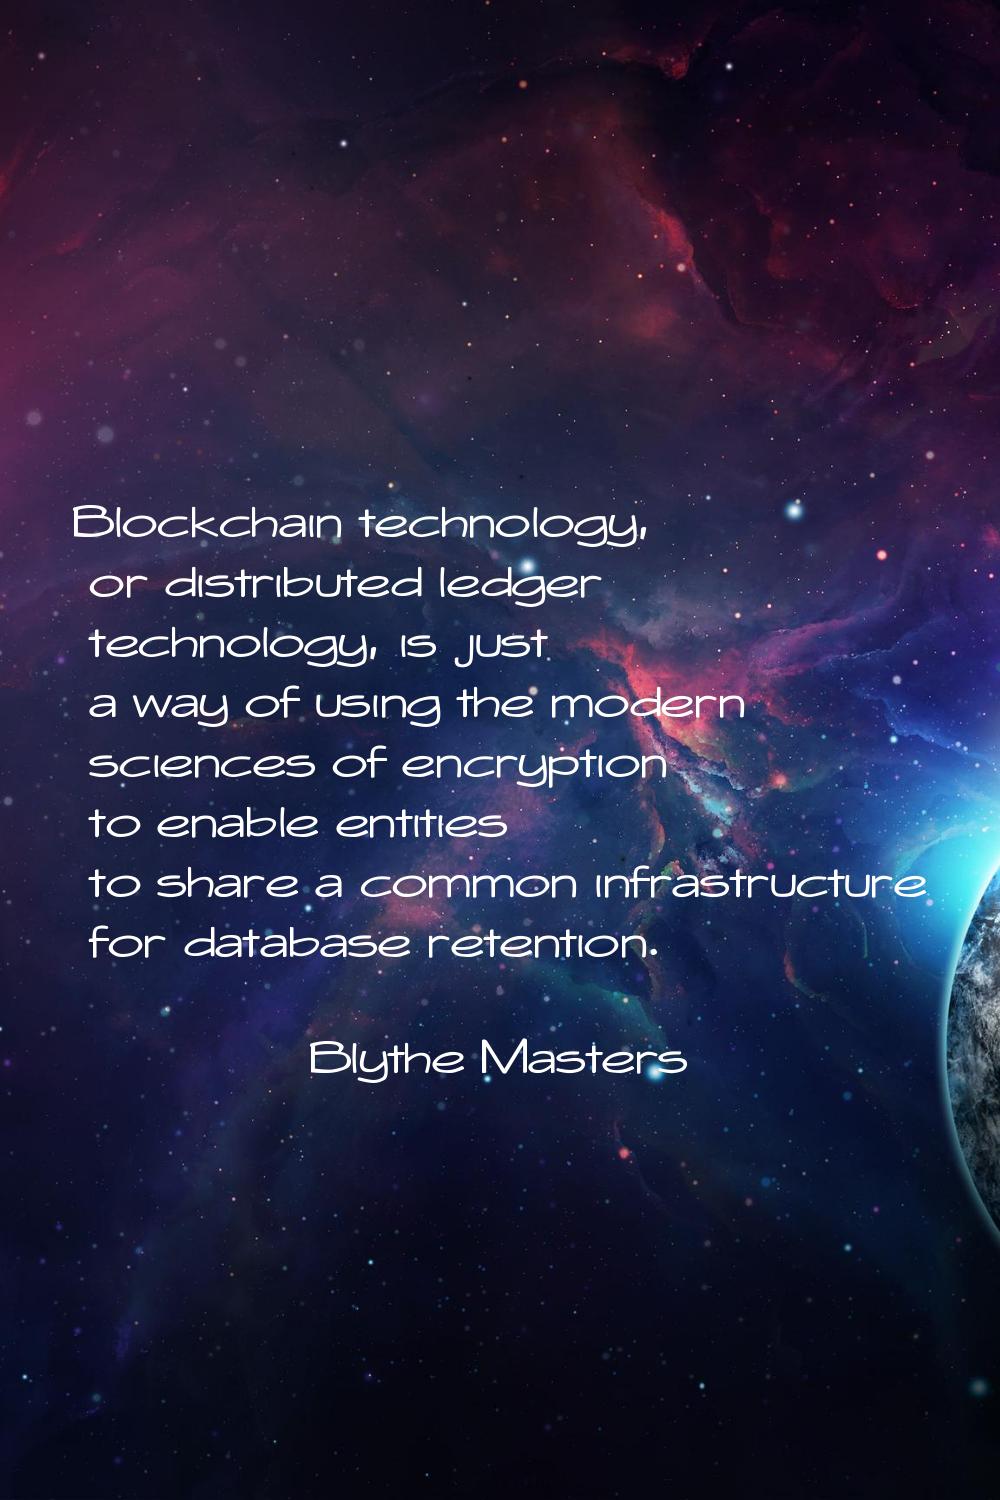 Blockchain technology, or distributed ledger technology, is just a way of using the modern sciences